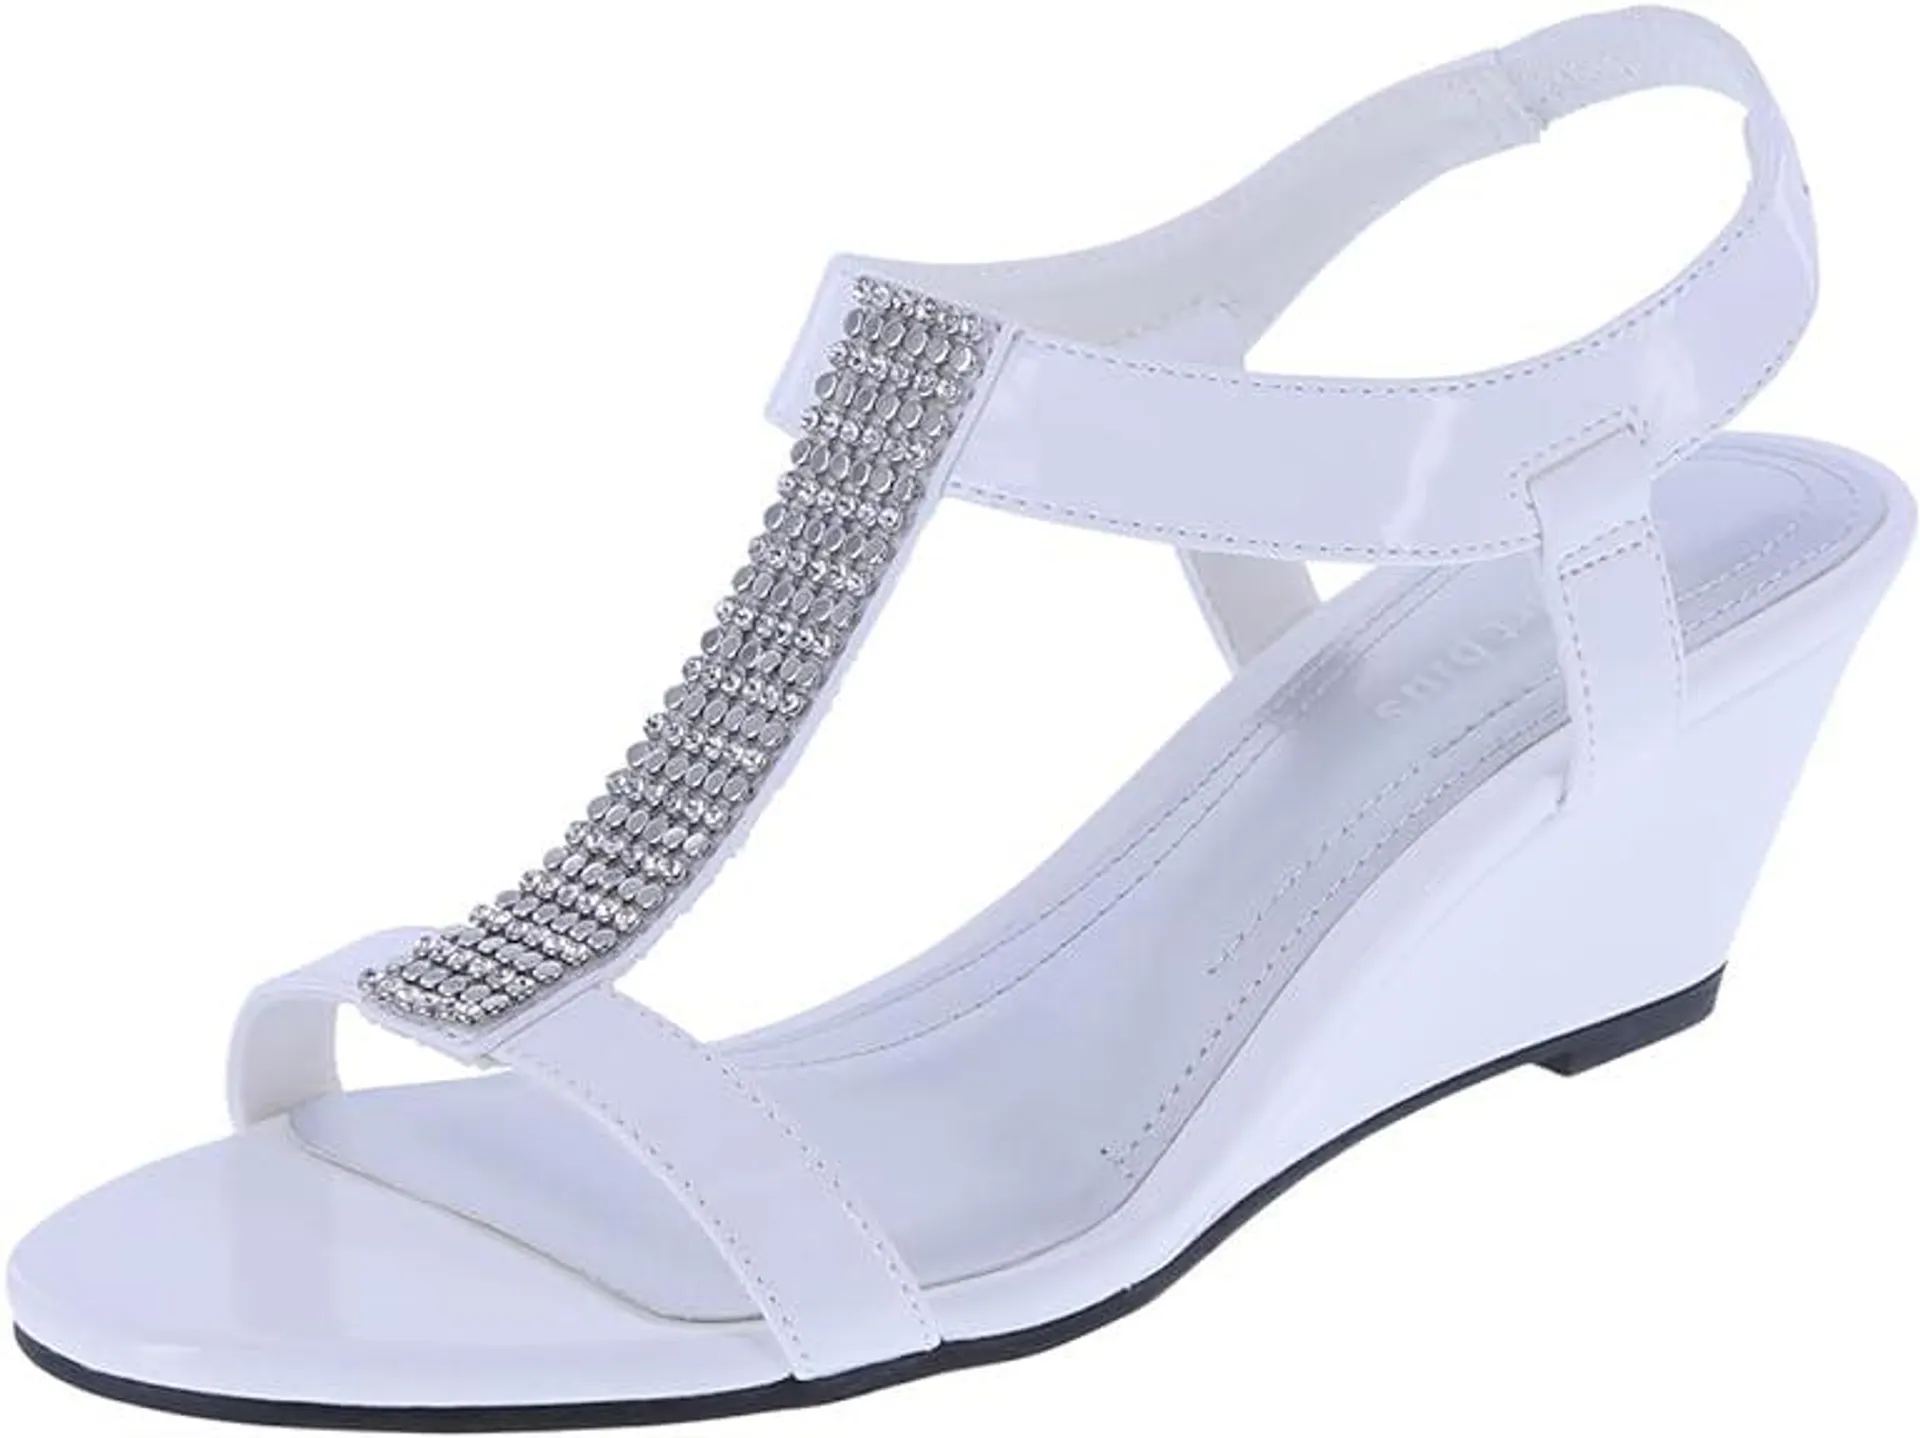 Comfort Plus by Predictions Women's Swanky Embellished Wedge